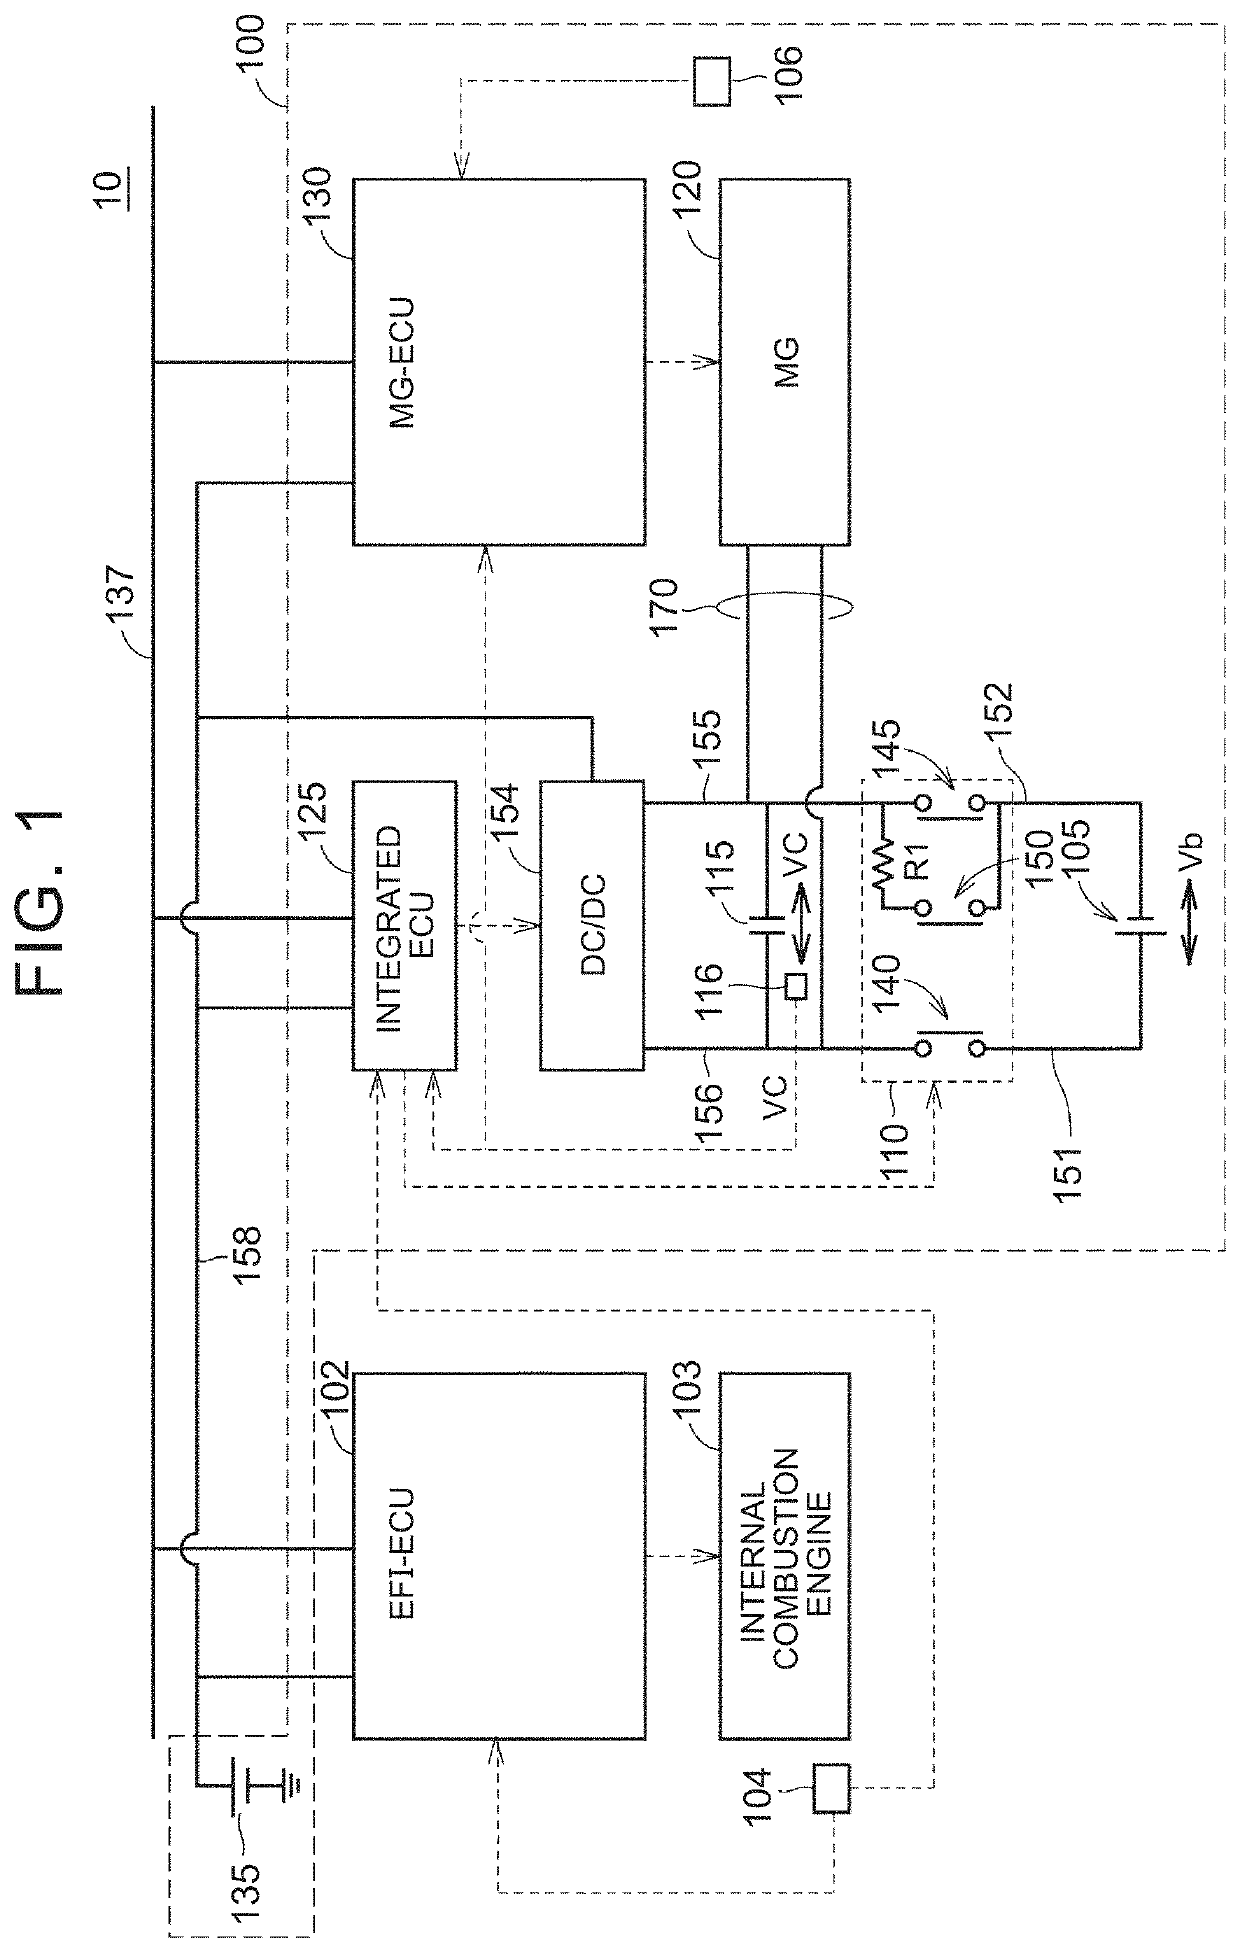 Motor control system and hybrid electric vehicle